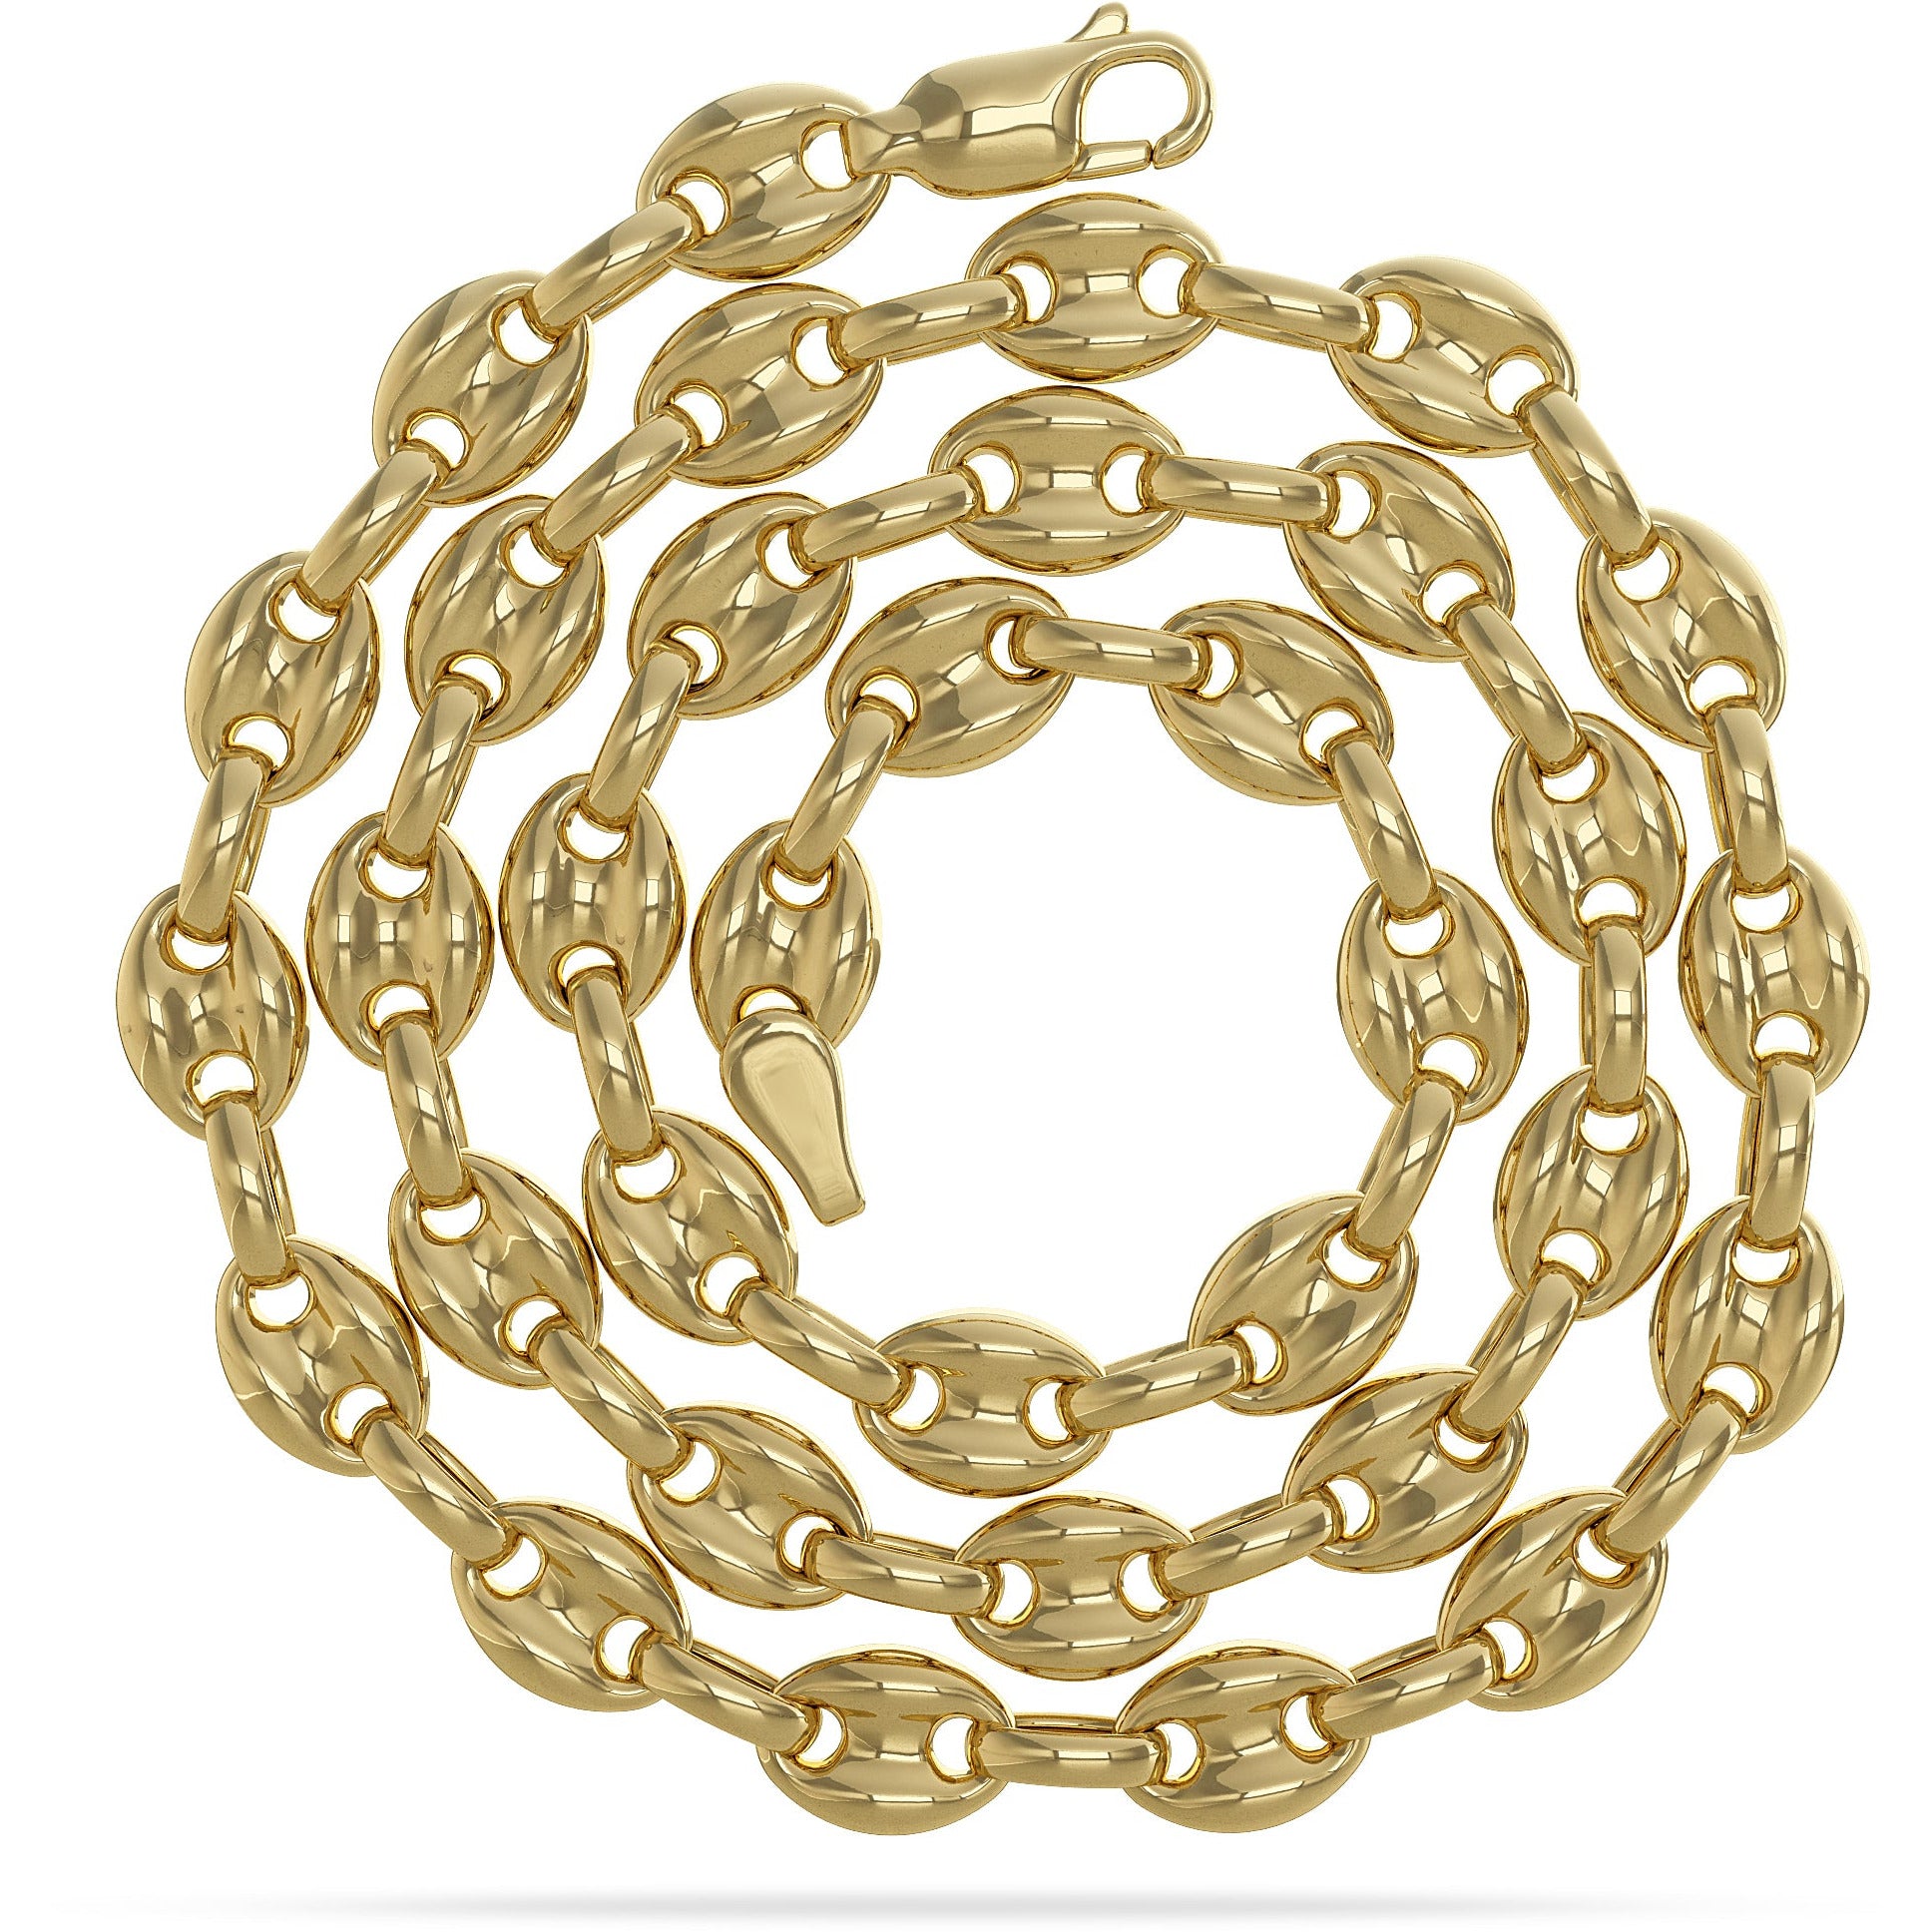 Gold Puff Anchor Link Chain Gucci Style Spiral